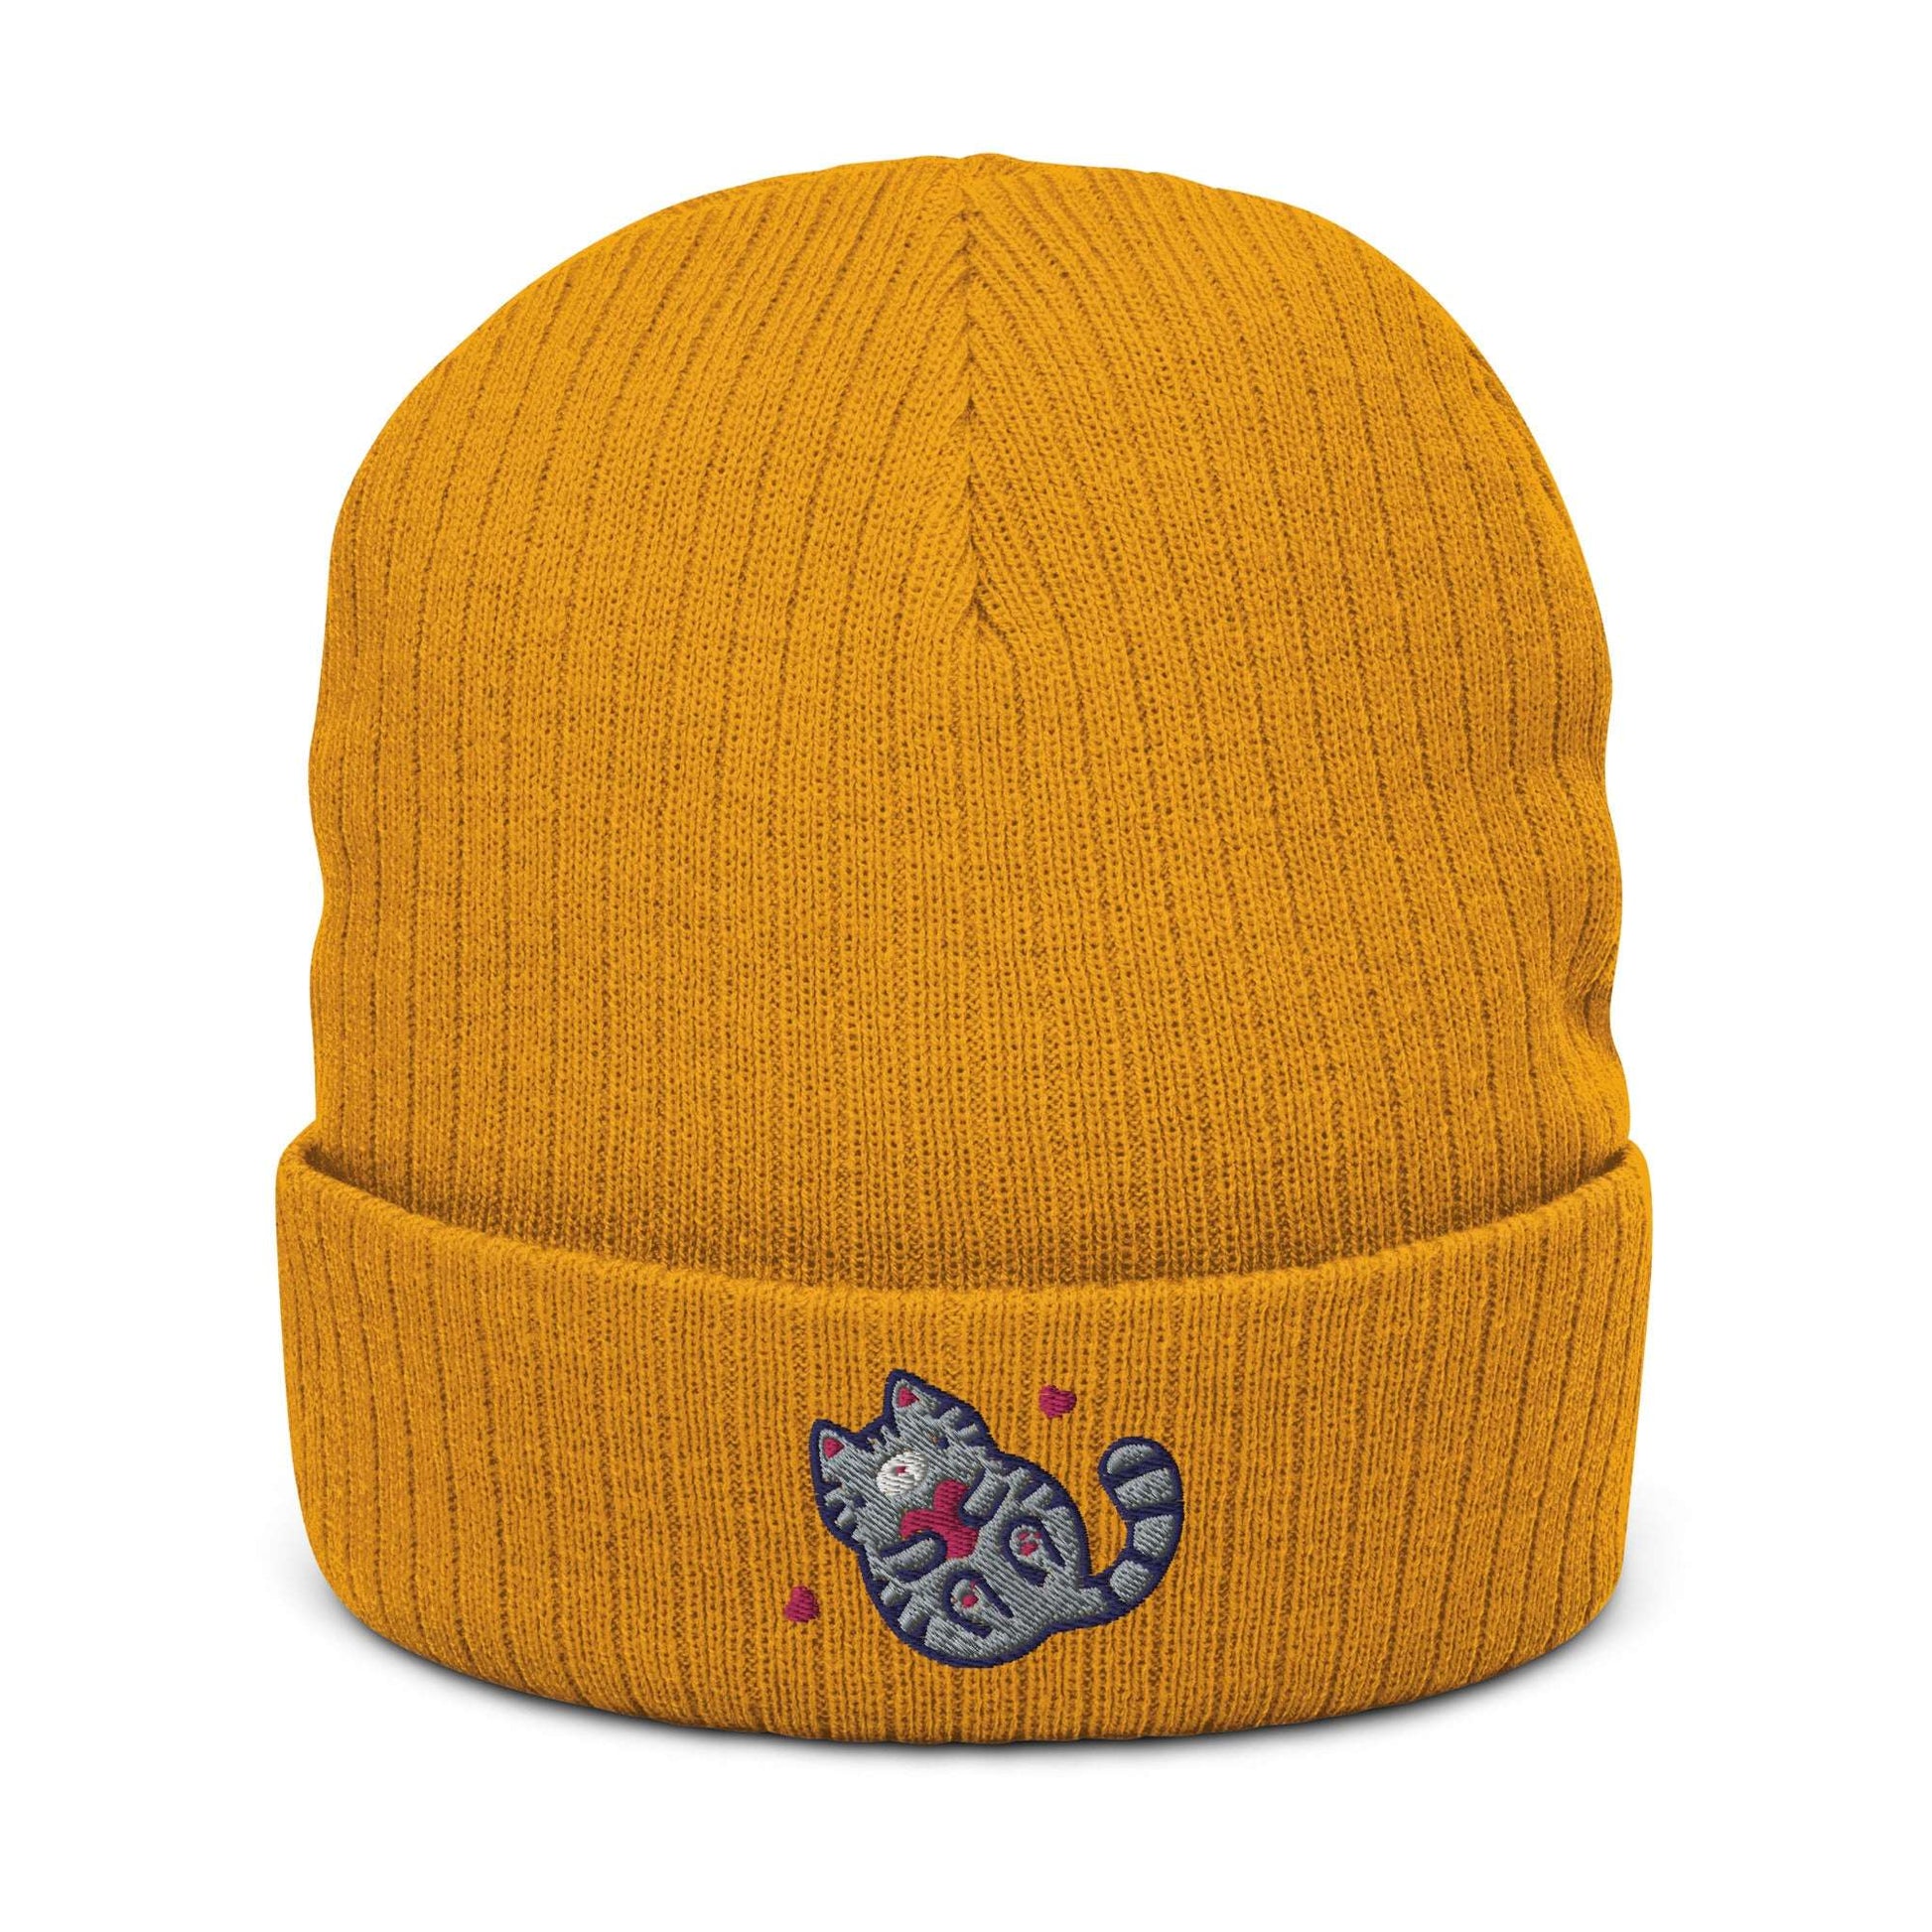 Ribbed Beanie with Embroidered Grey Tabby Cat. Unisex Toque: Mustard